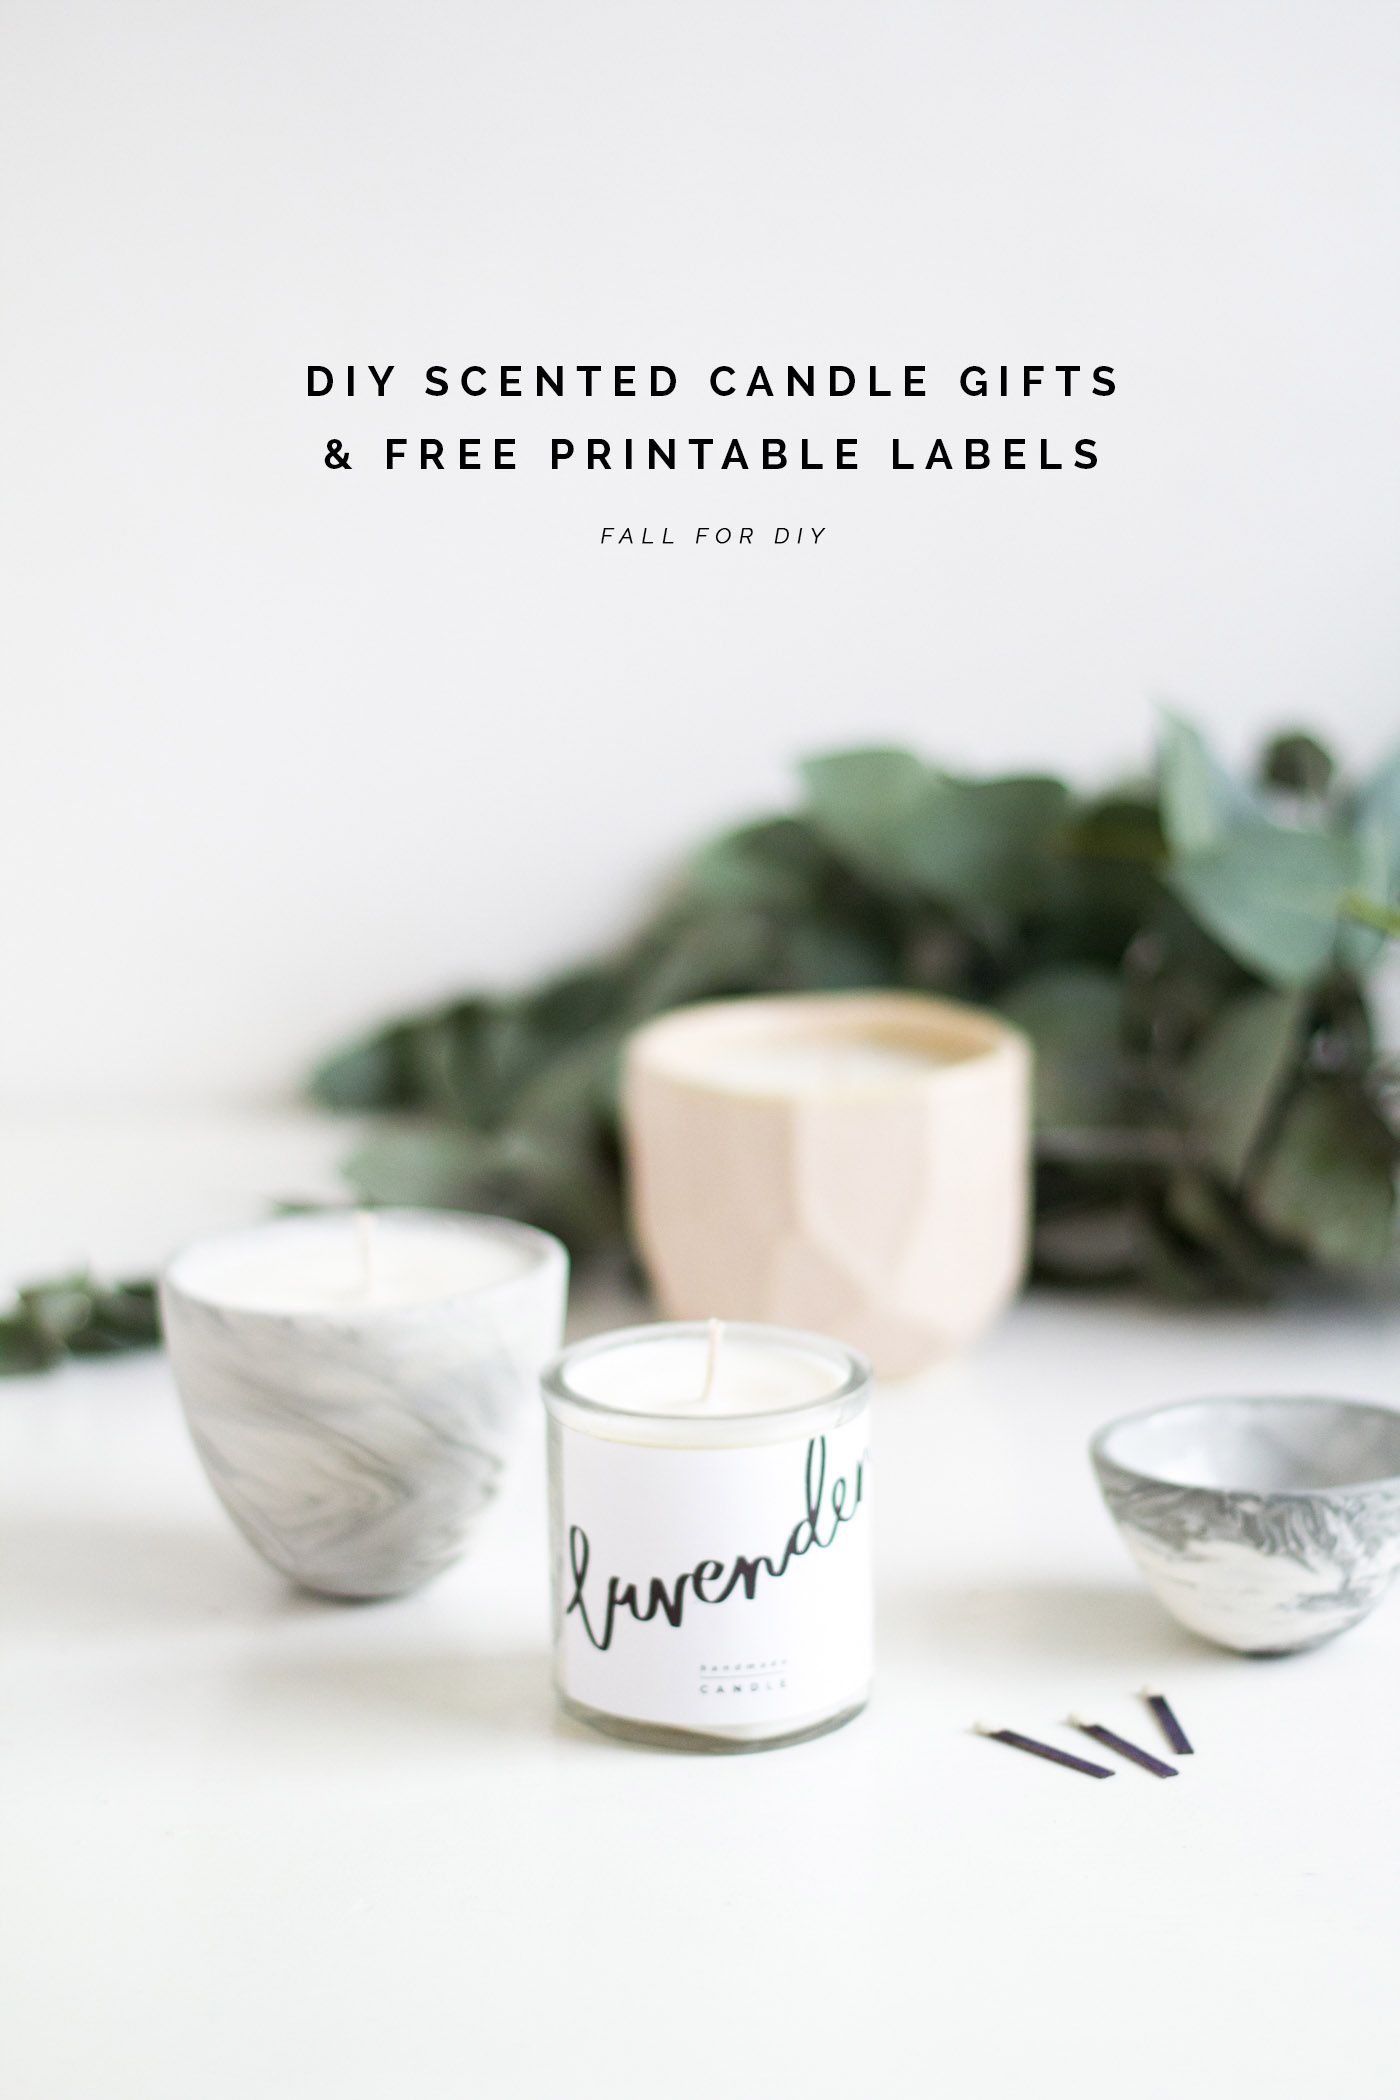 DIY Scented Candle Gifts & Free